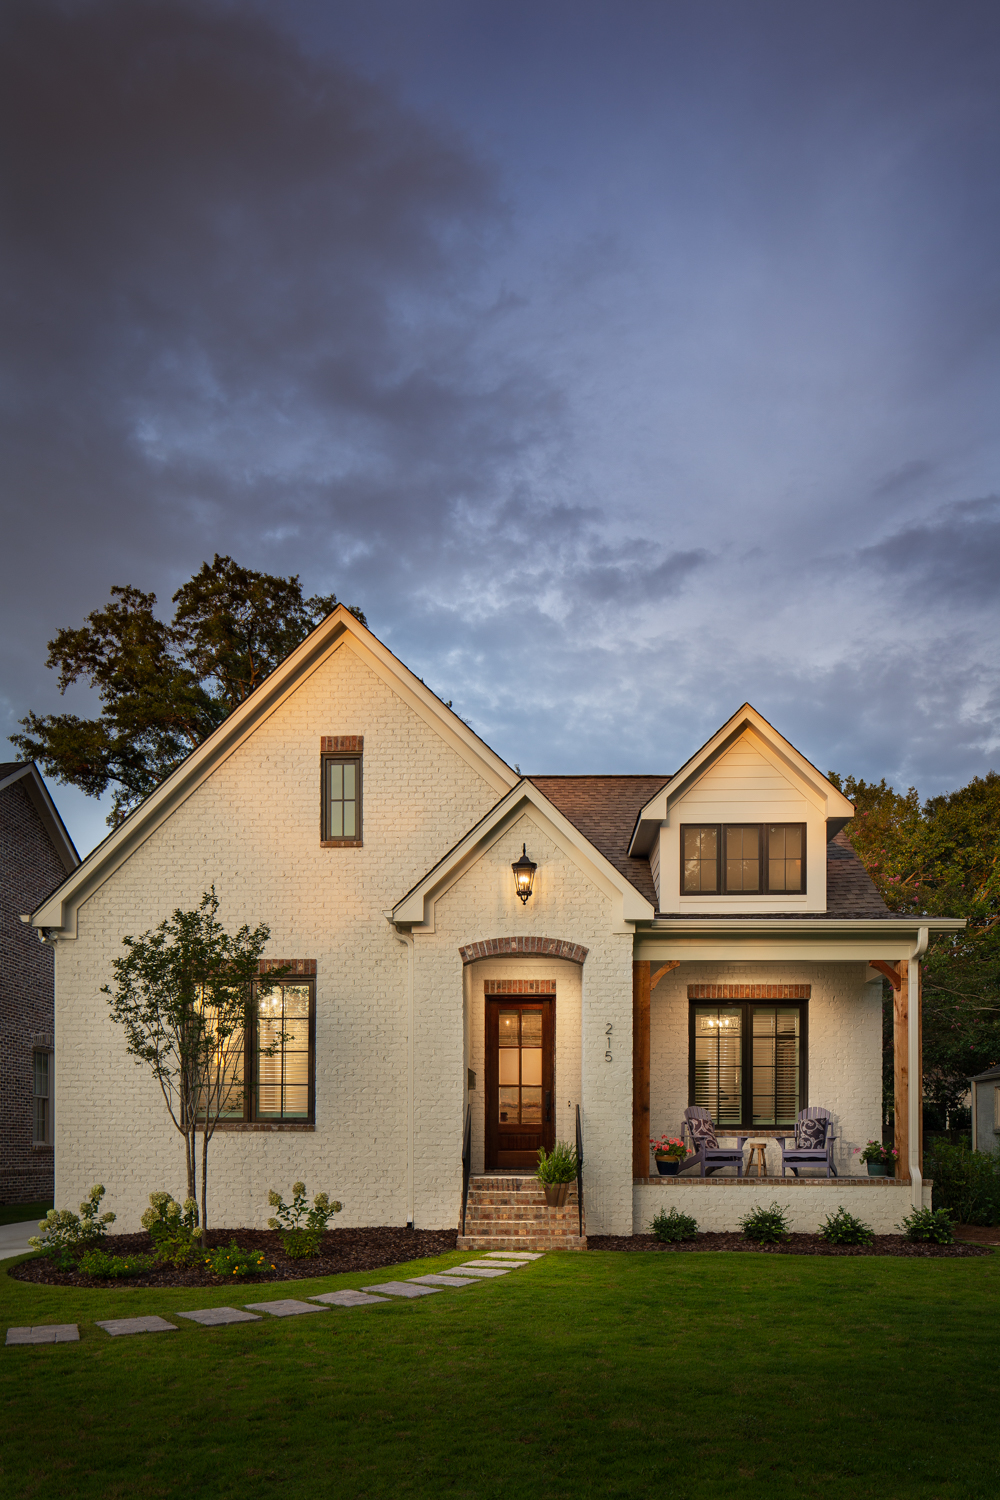  Residential new home construction of home in Homewood Alabama by Willow Homes, Willow Design Studio, and Triton Stone Group Photographed by Tommy Daspit, an architectural and interiors photographer based in Birmingham Alabama. See more of his work a